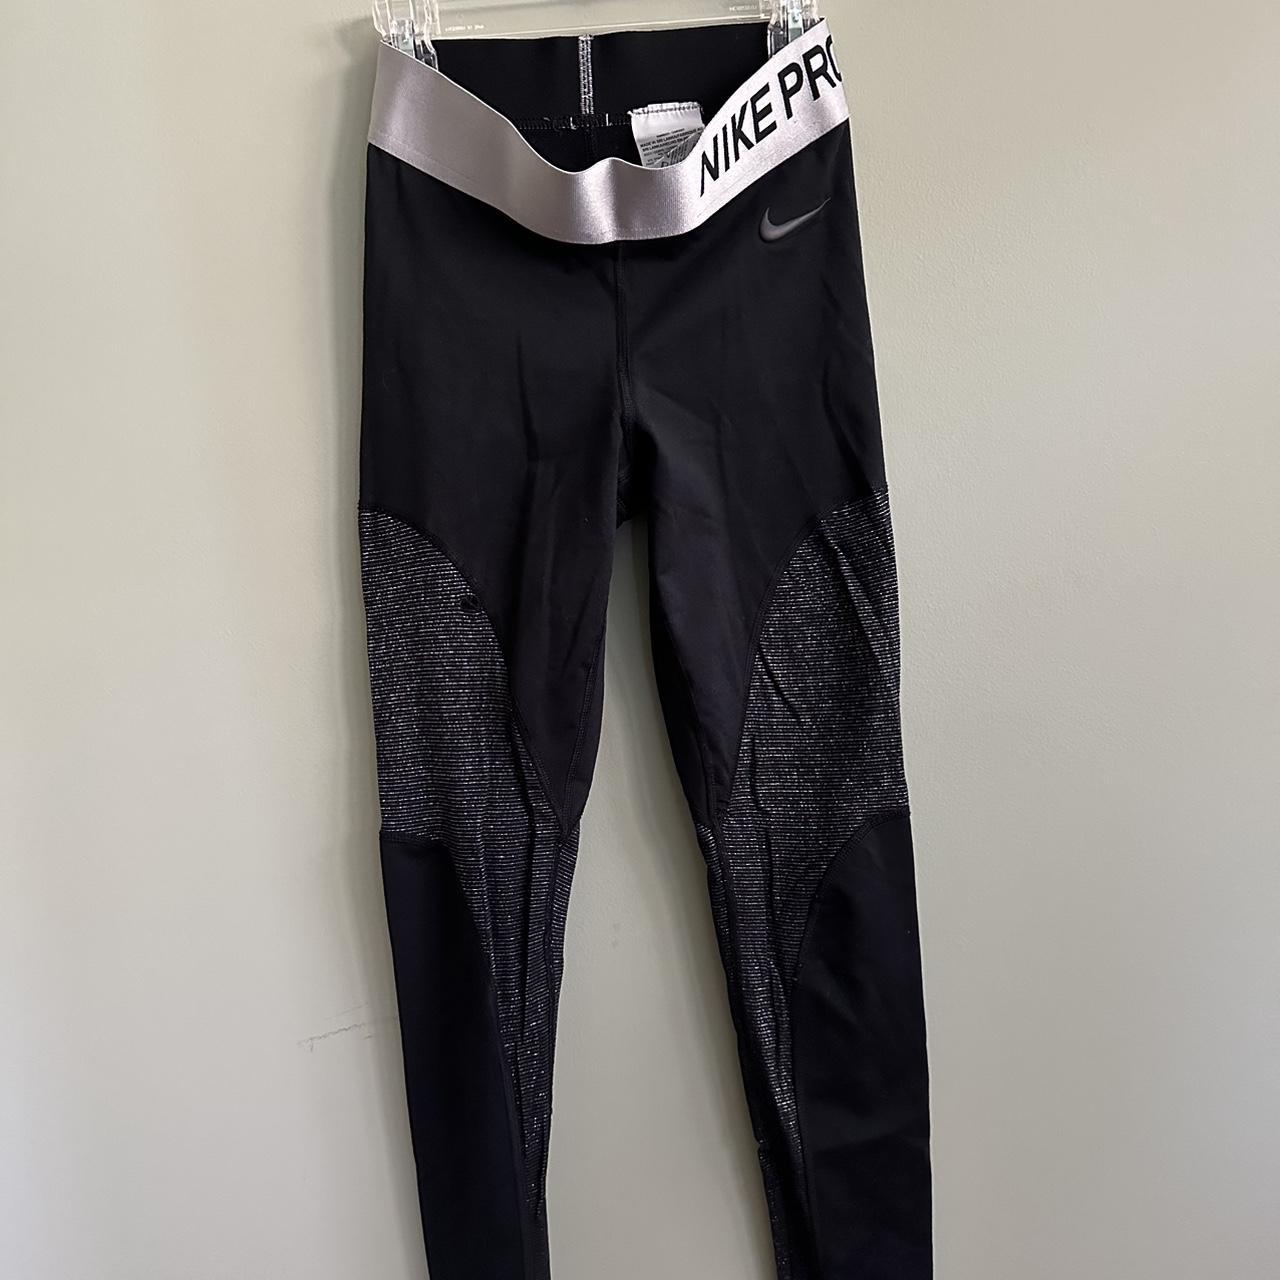 Nike Dry Fit leggings! These keep you so warm, I - Depop